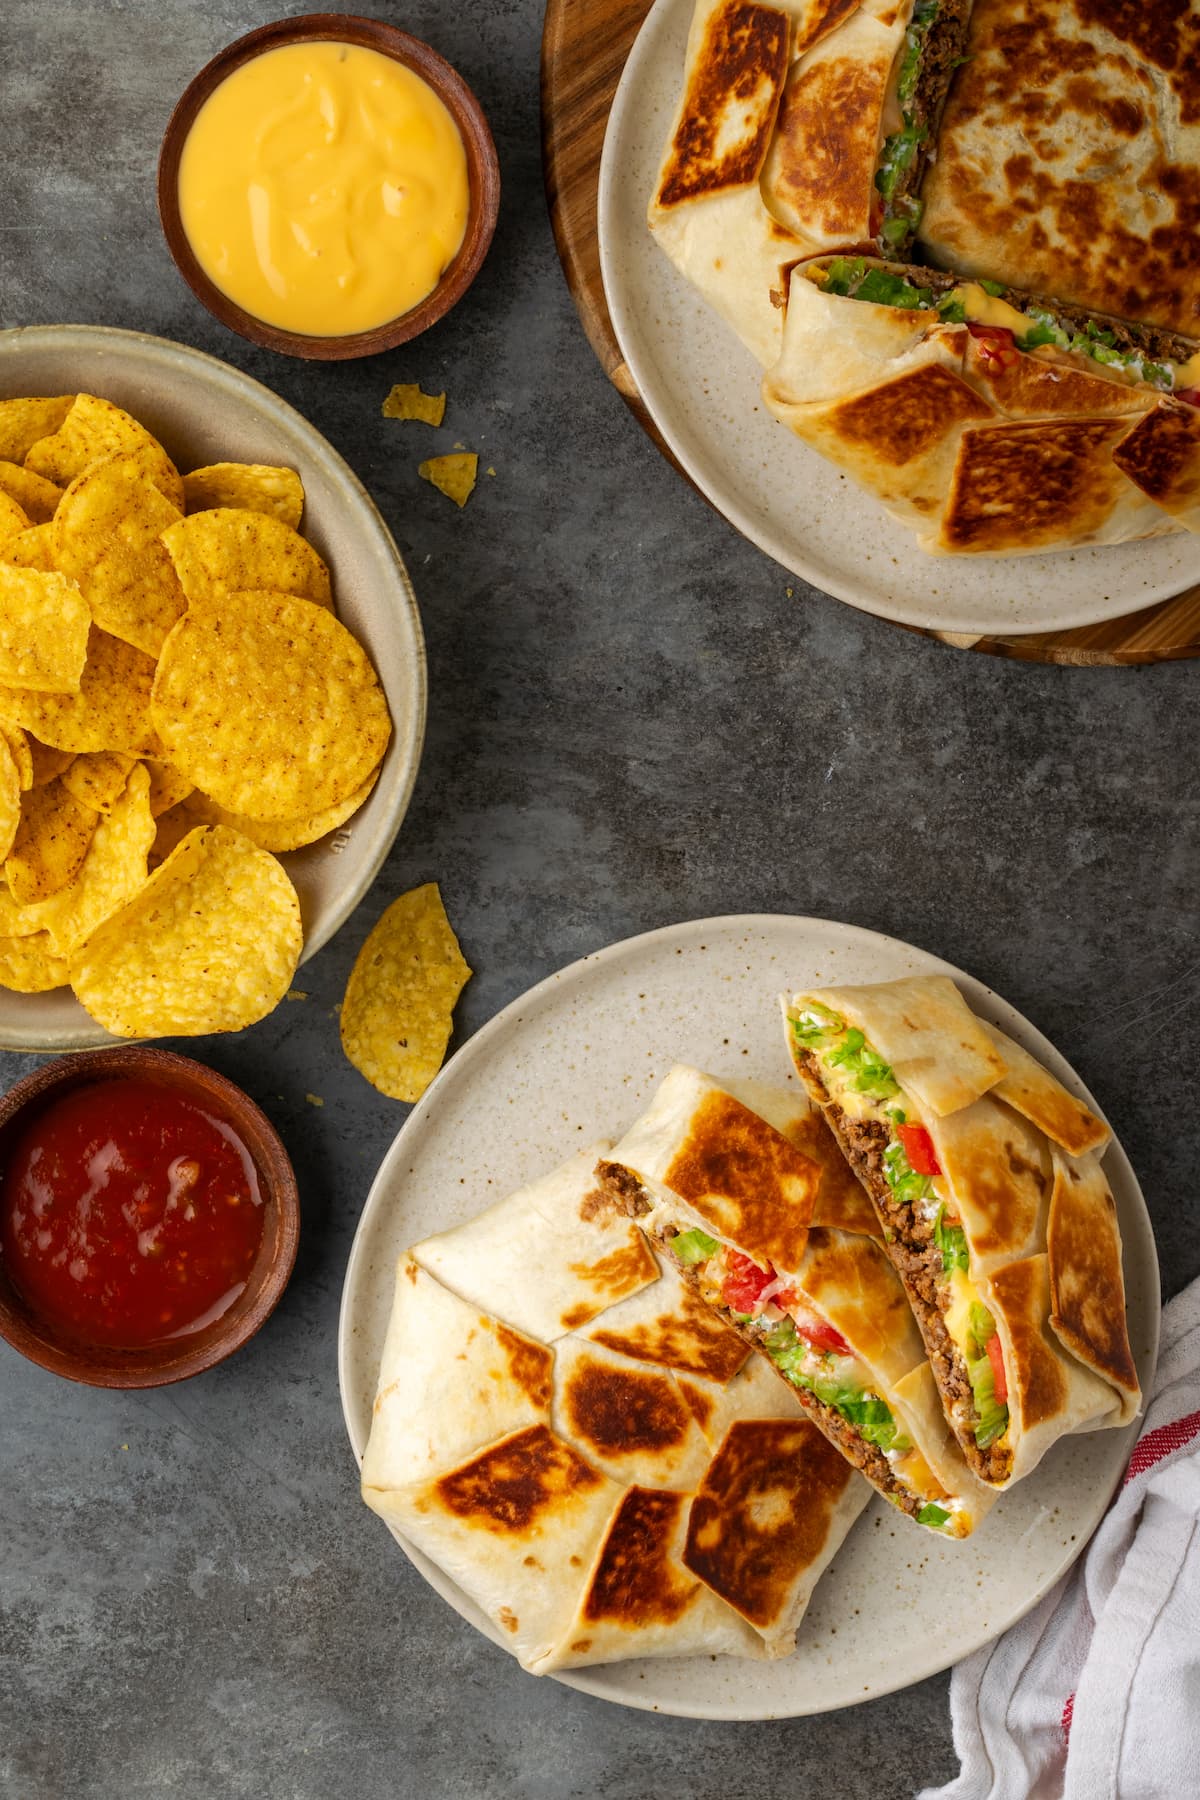 Overhead view of crunch wraps served on plates next to a bowl of corn chips and salsa for dipping.